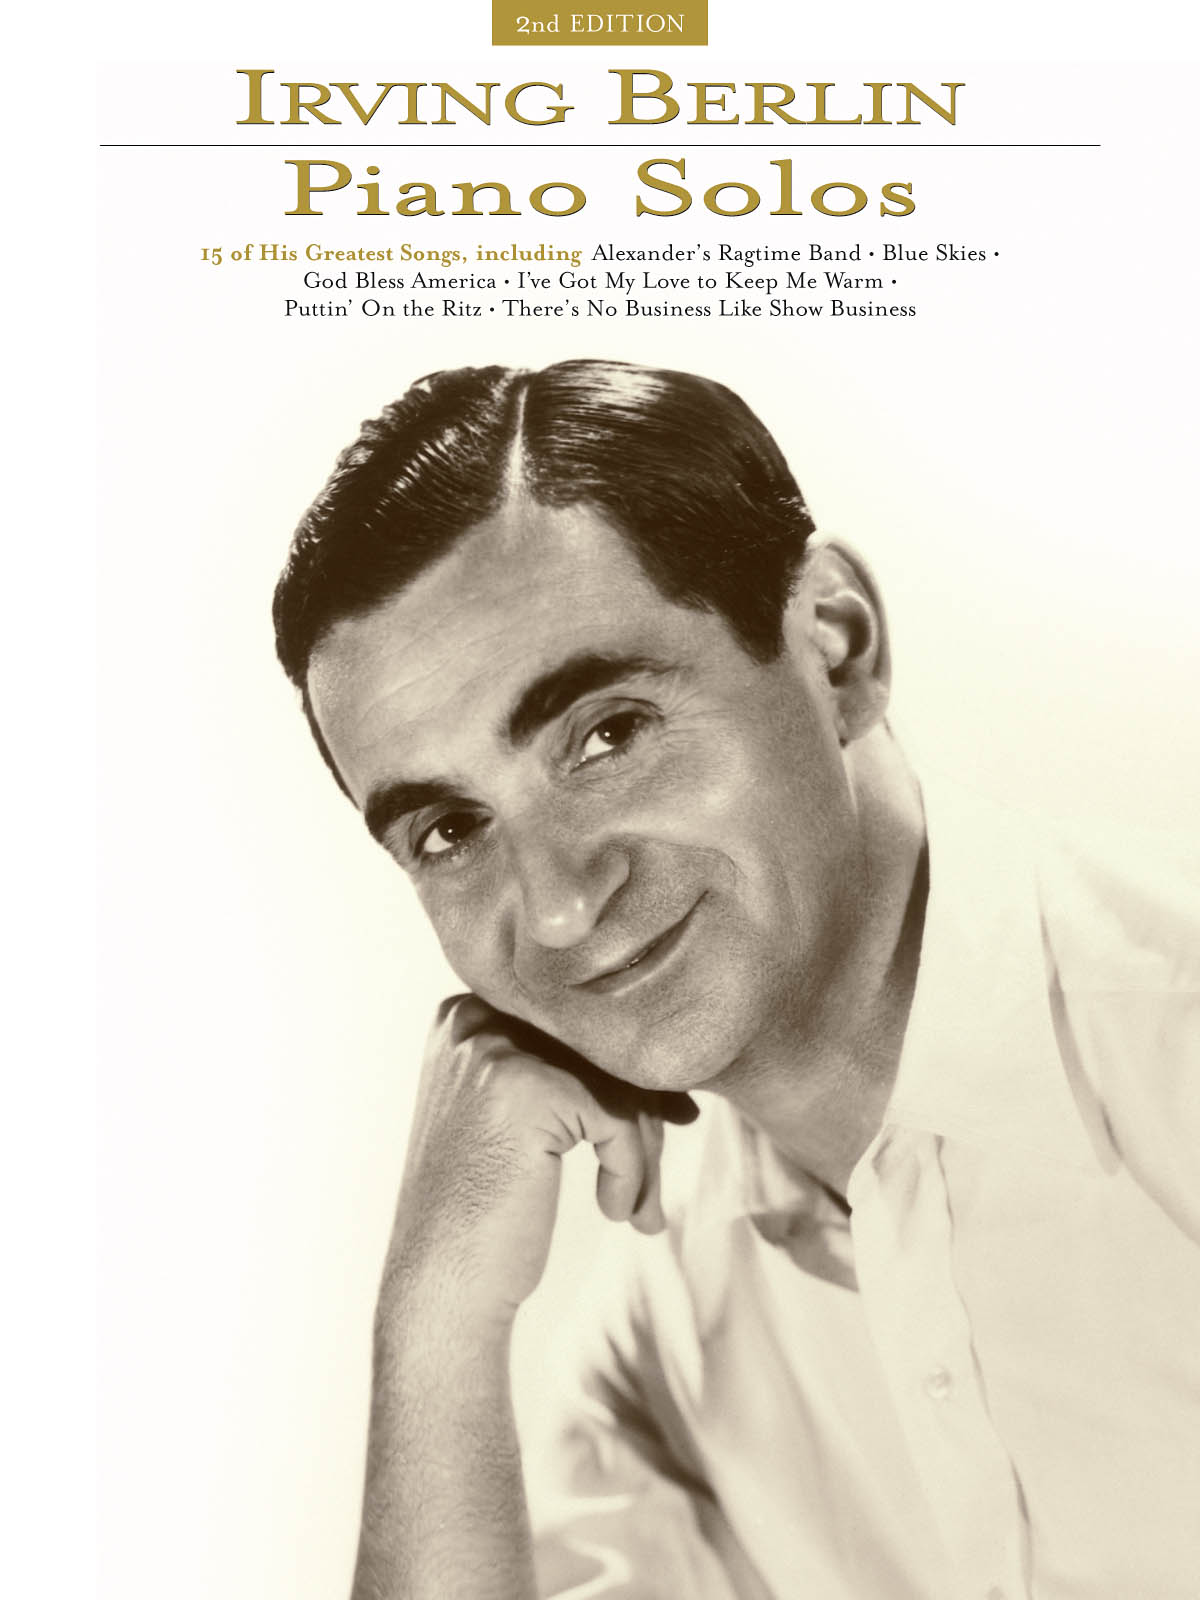 Irving Berlin Piano Solos - 2nd Edition